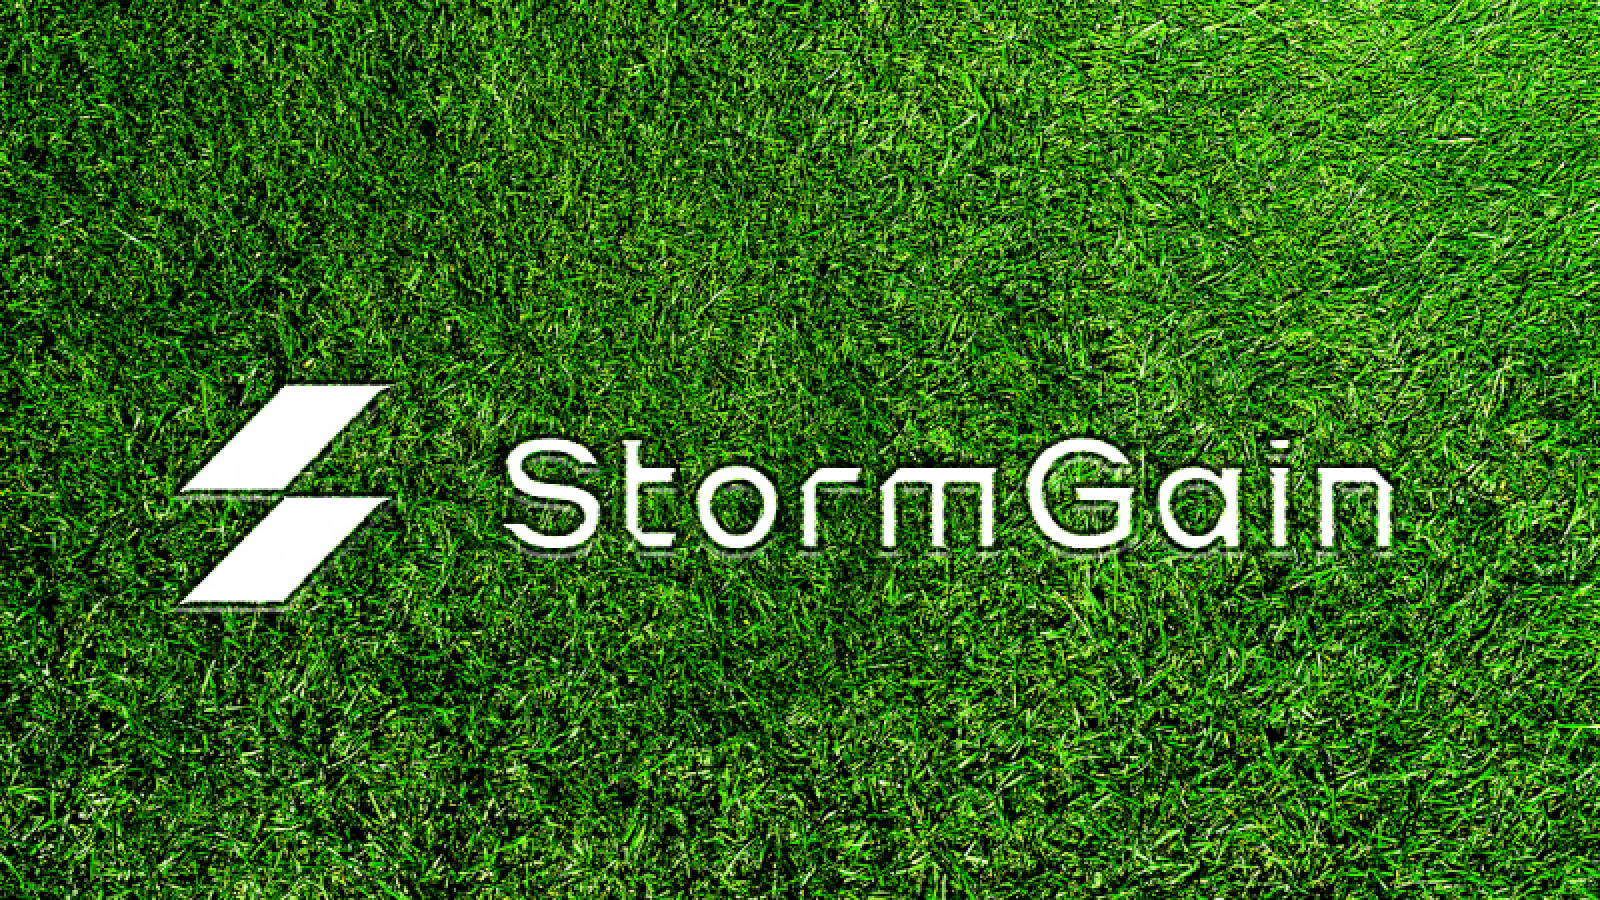 StormGain Signs Long-Term Partnership with Serie A’s SS Lazio